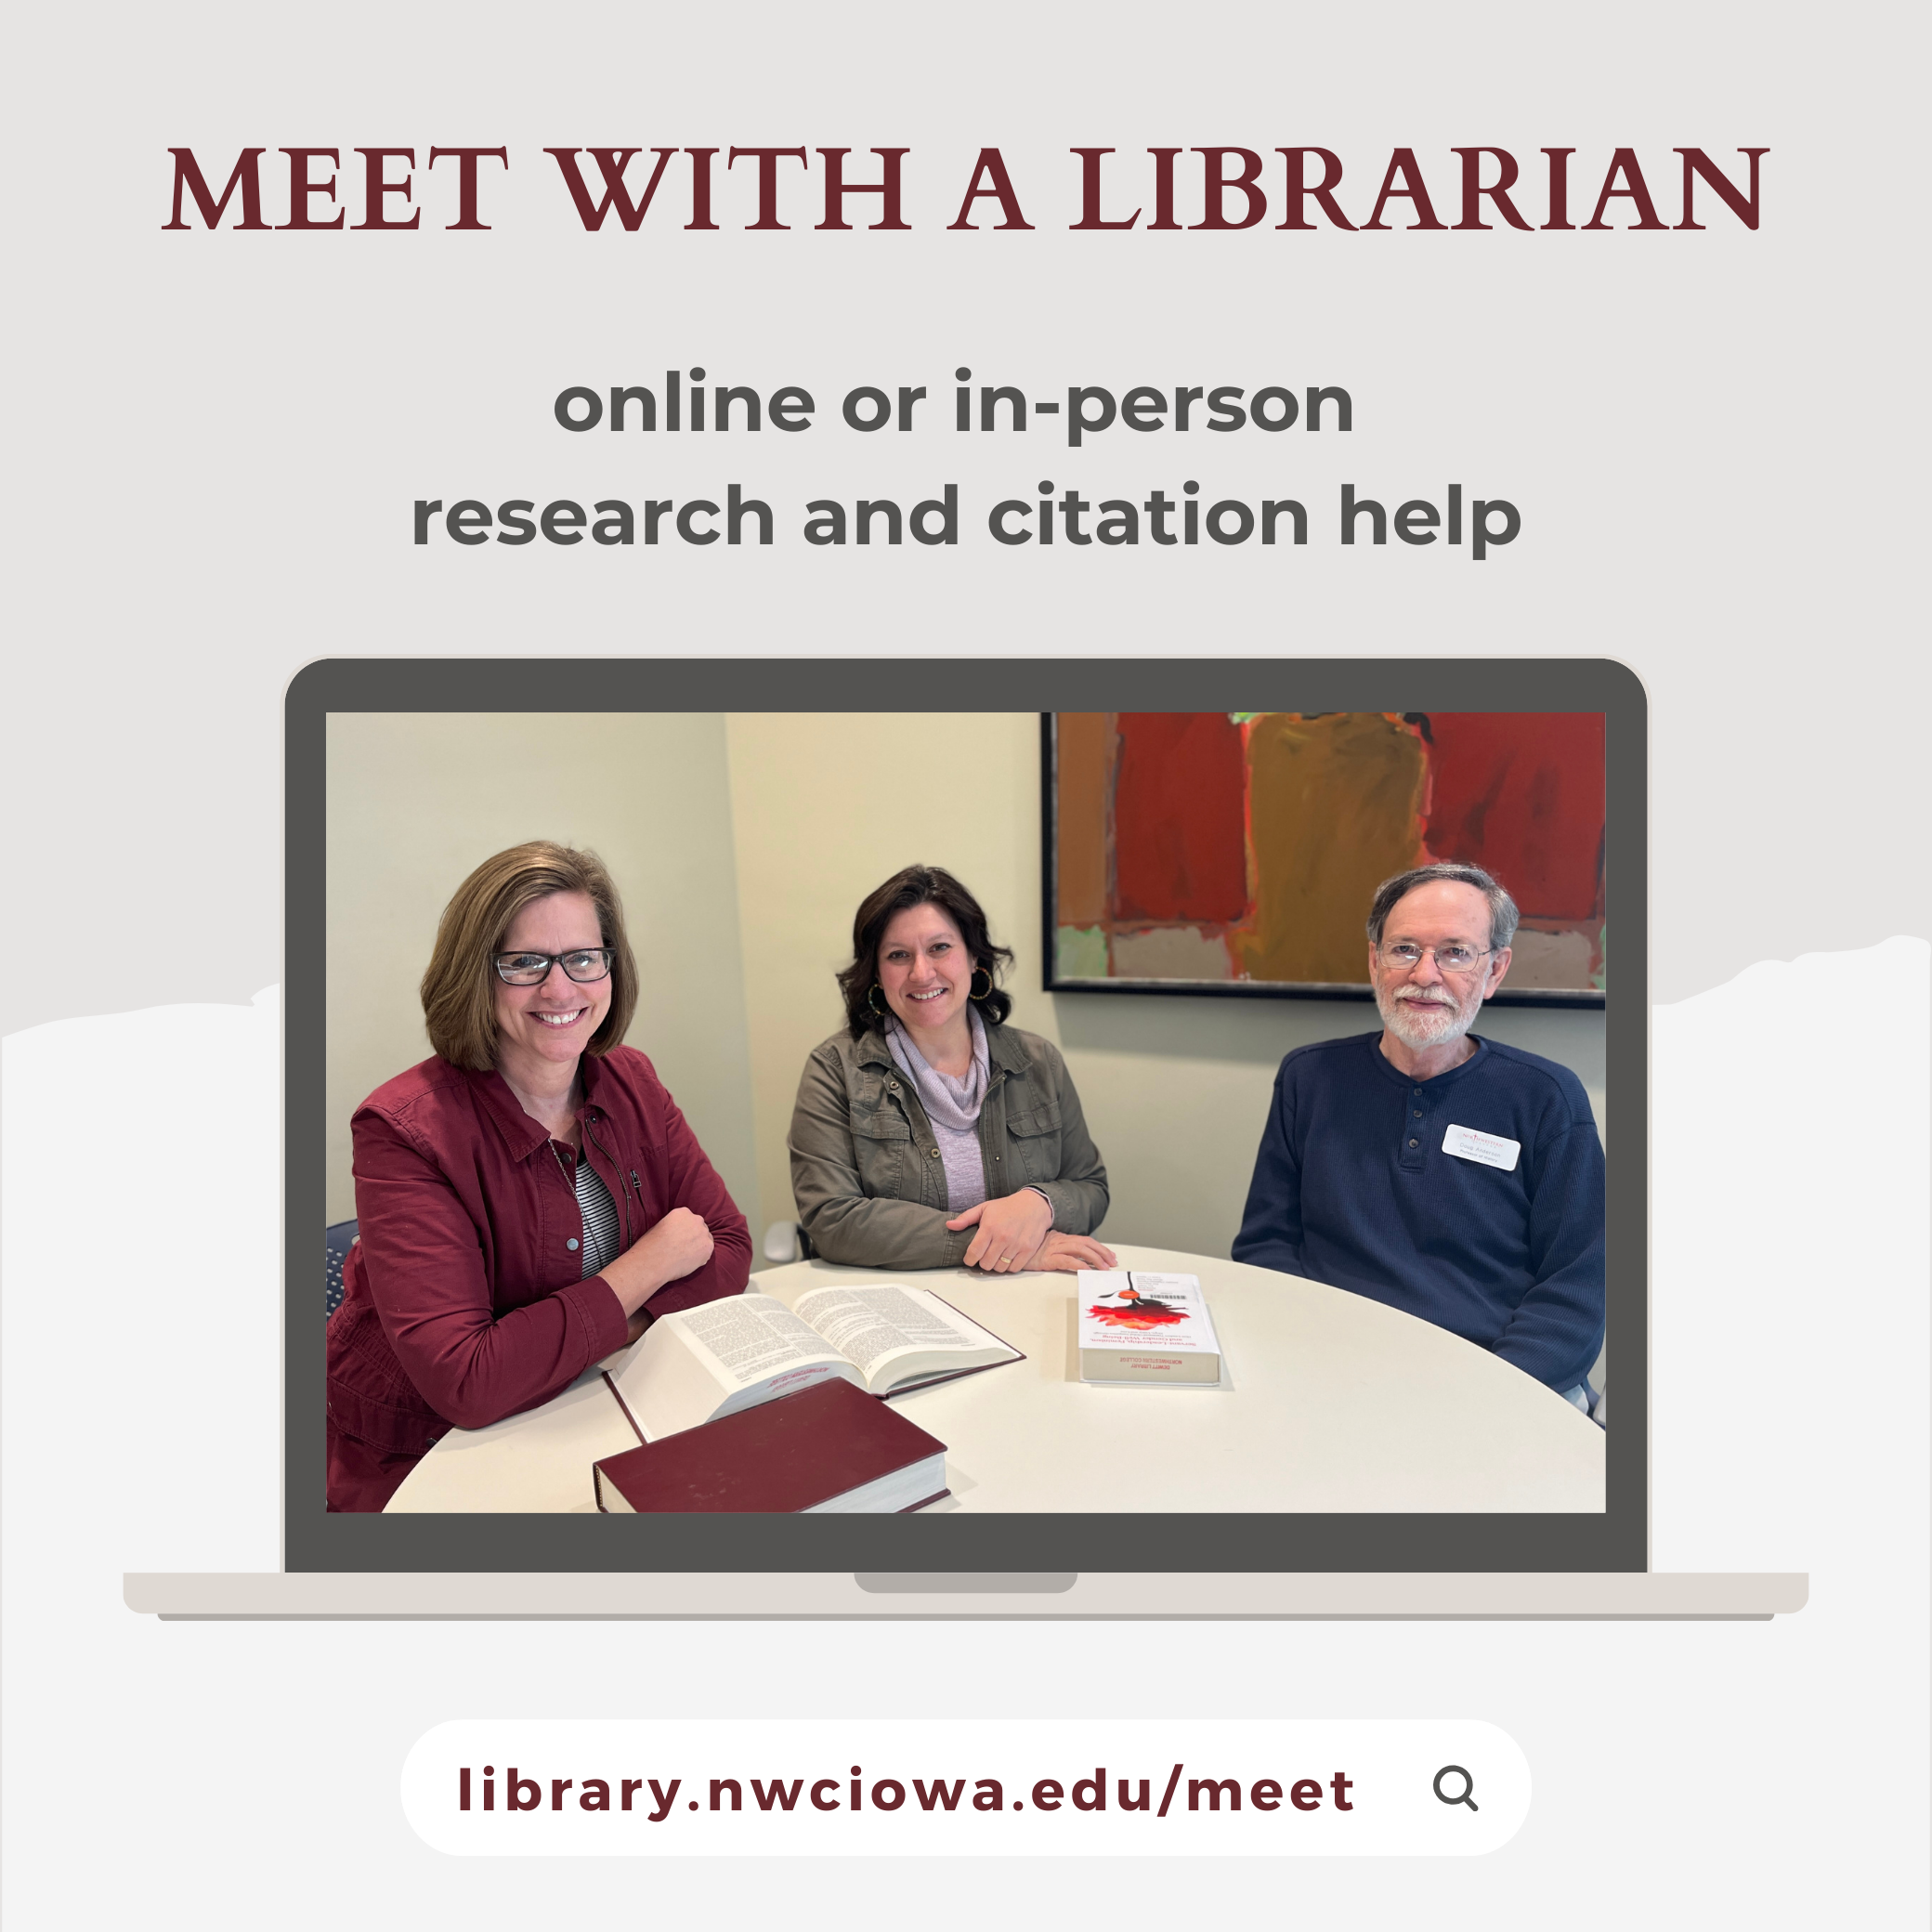 Meet with a Librarian